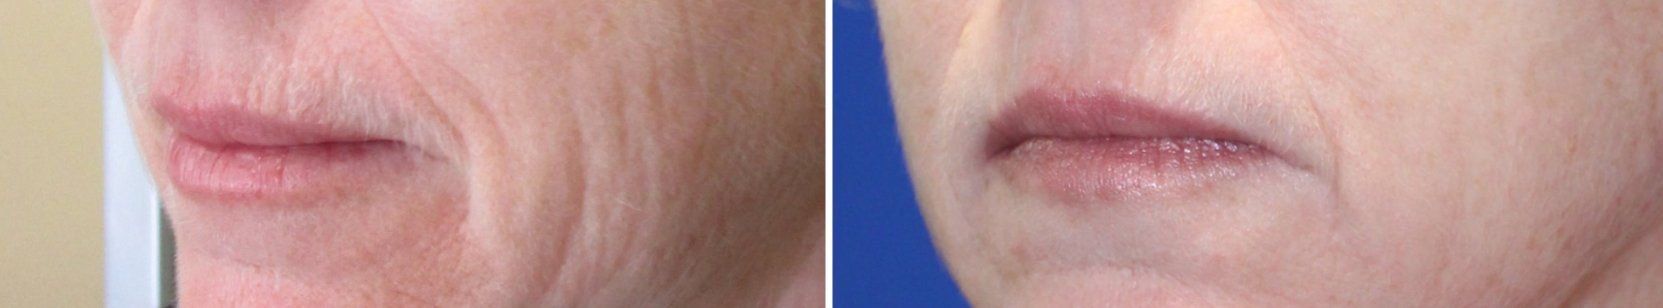 Skin Tightening Treatments NYC Before and After